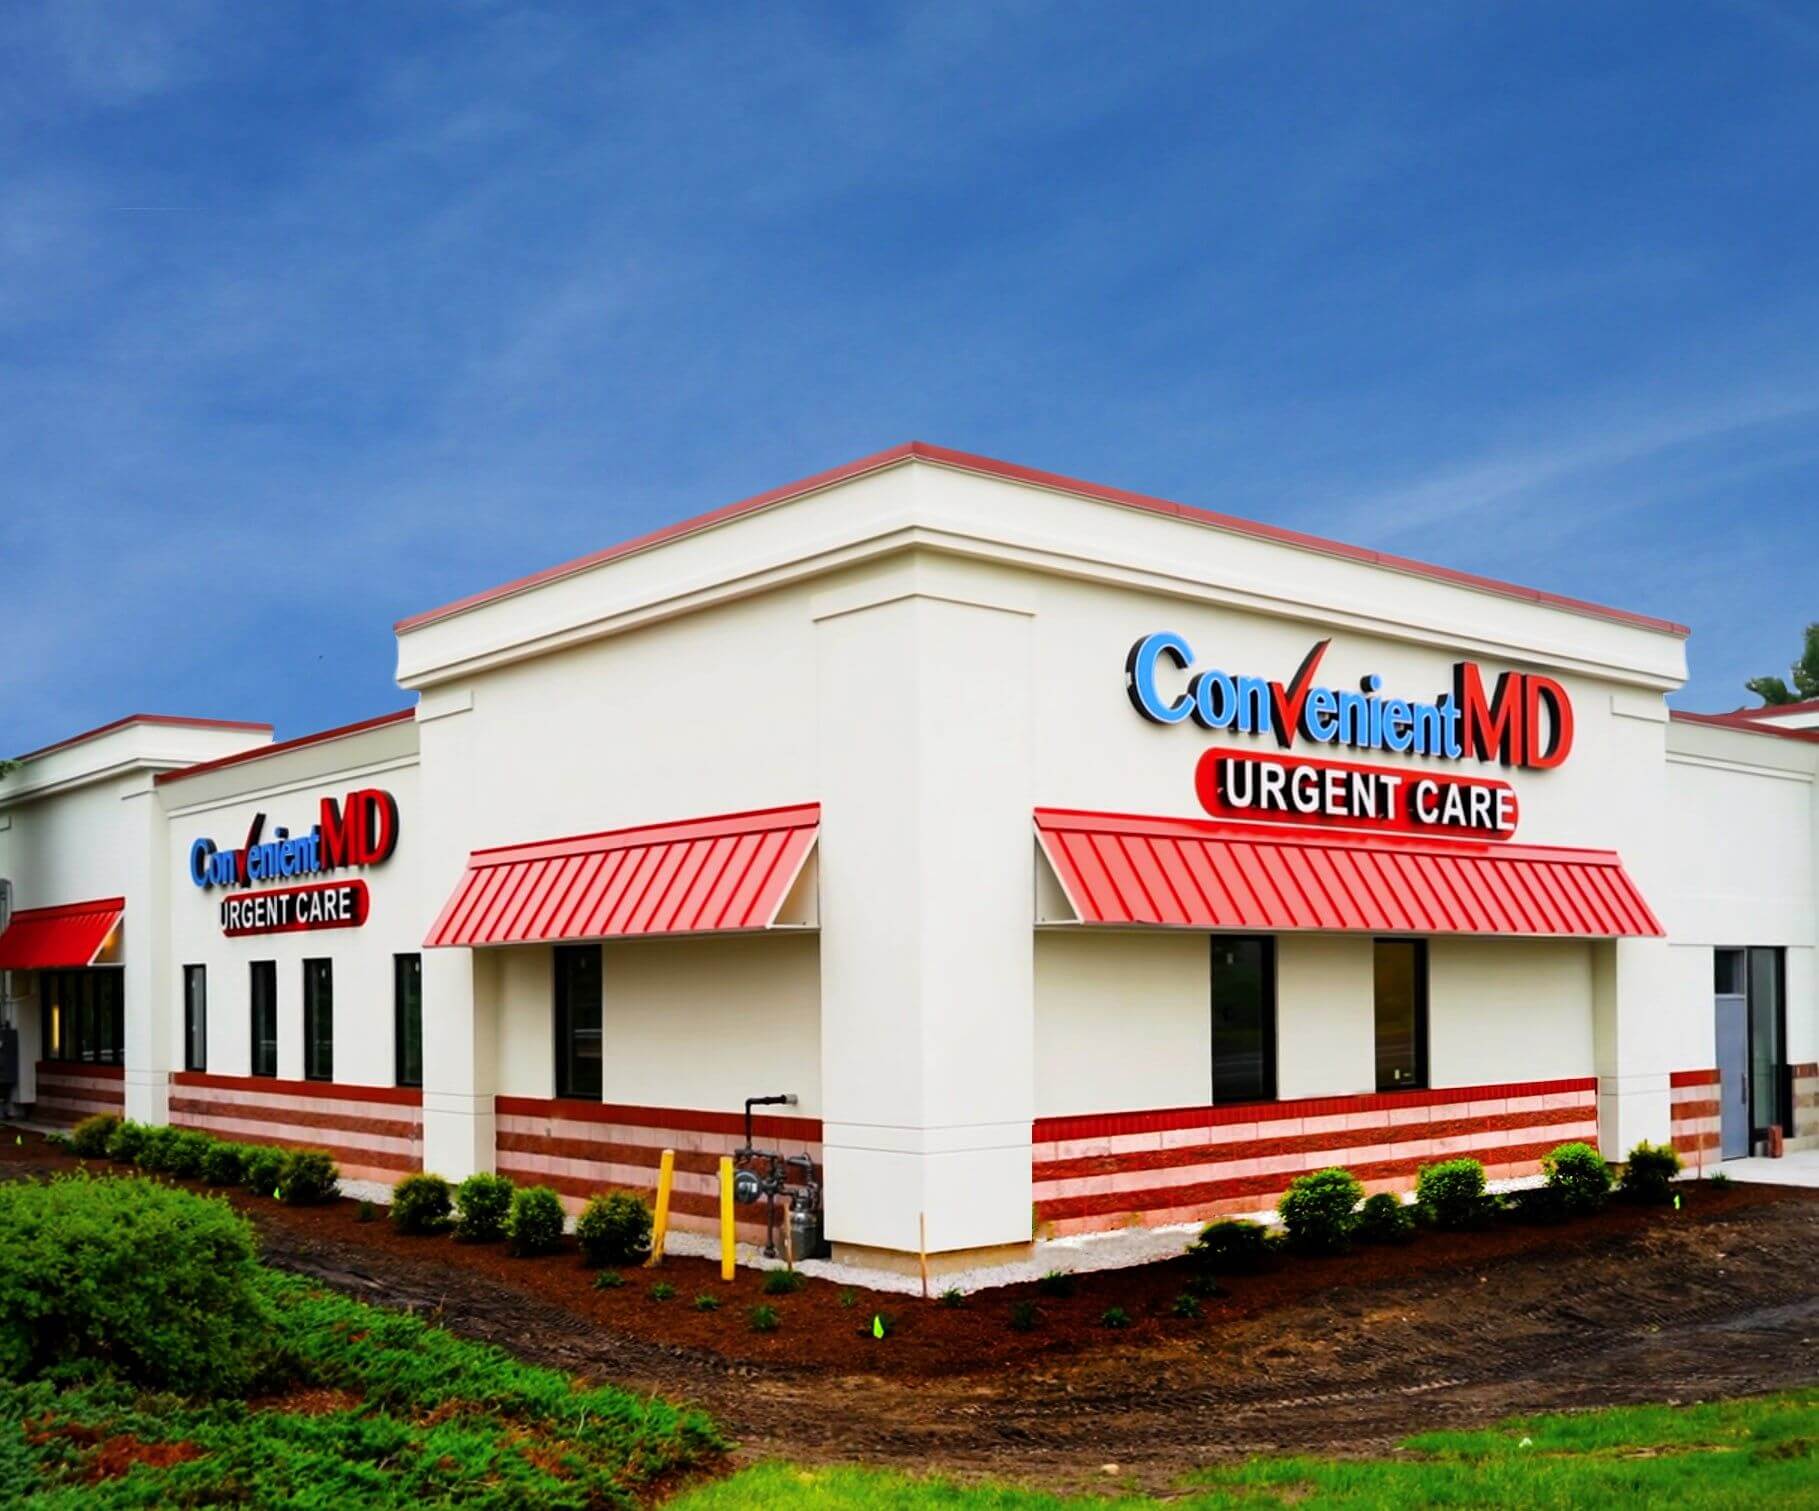 ConvenientMD, New England’s Leading Urgent Care Provider, Opening New Clinic in Bellingham, MA